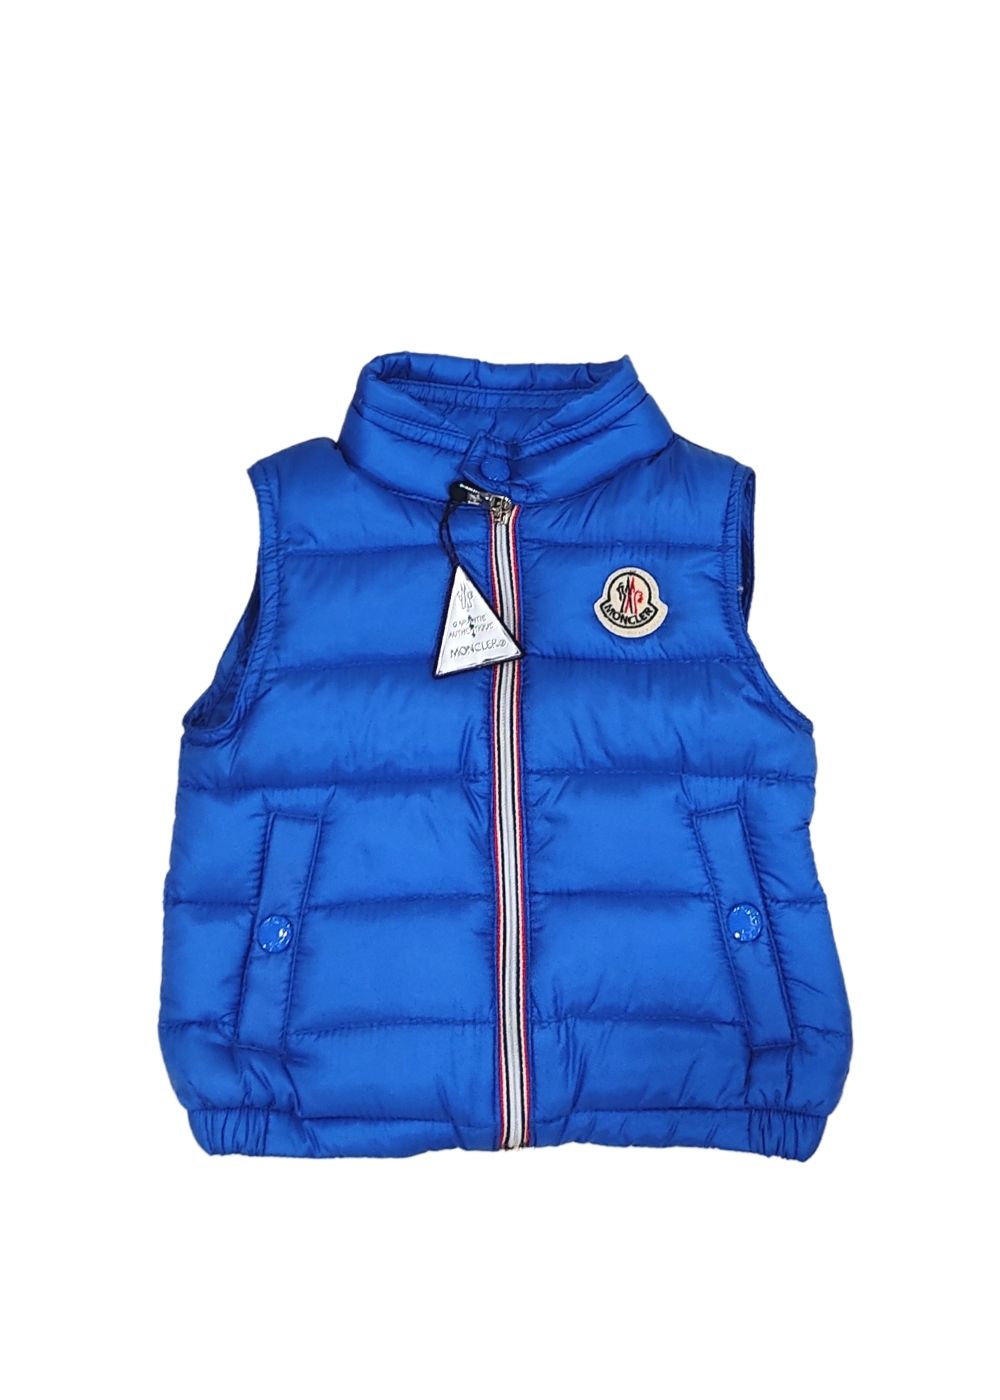 Featured image for “MONCLER GILET UNISEX”